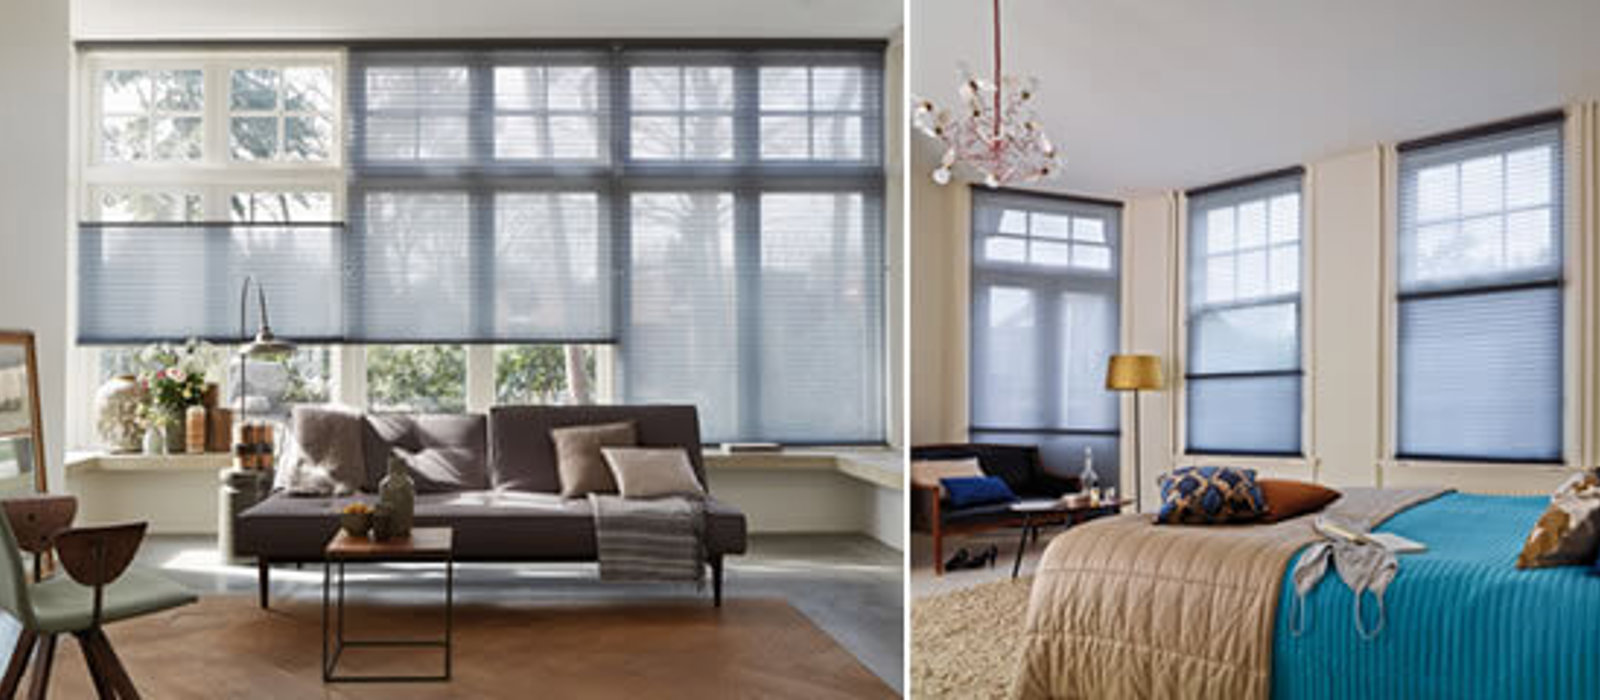 Duette energy saving blinds for heat reduction in the home